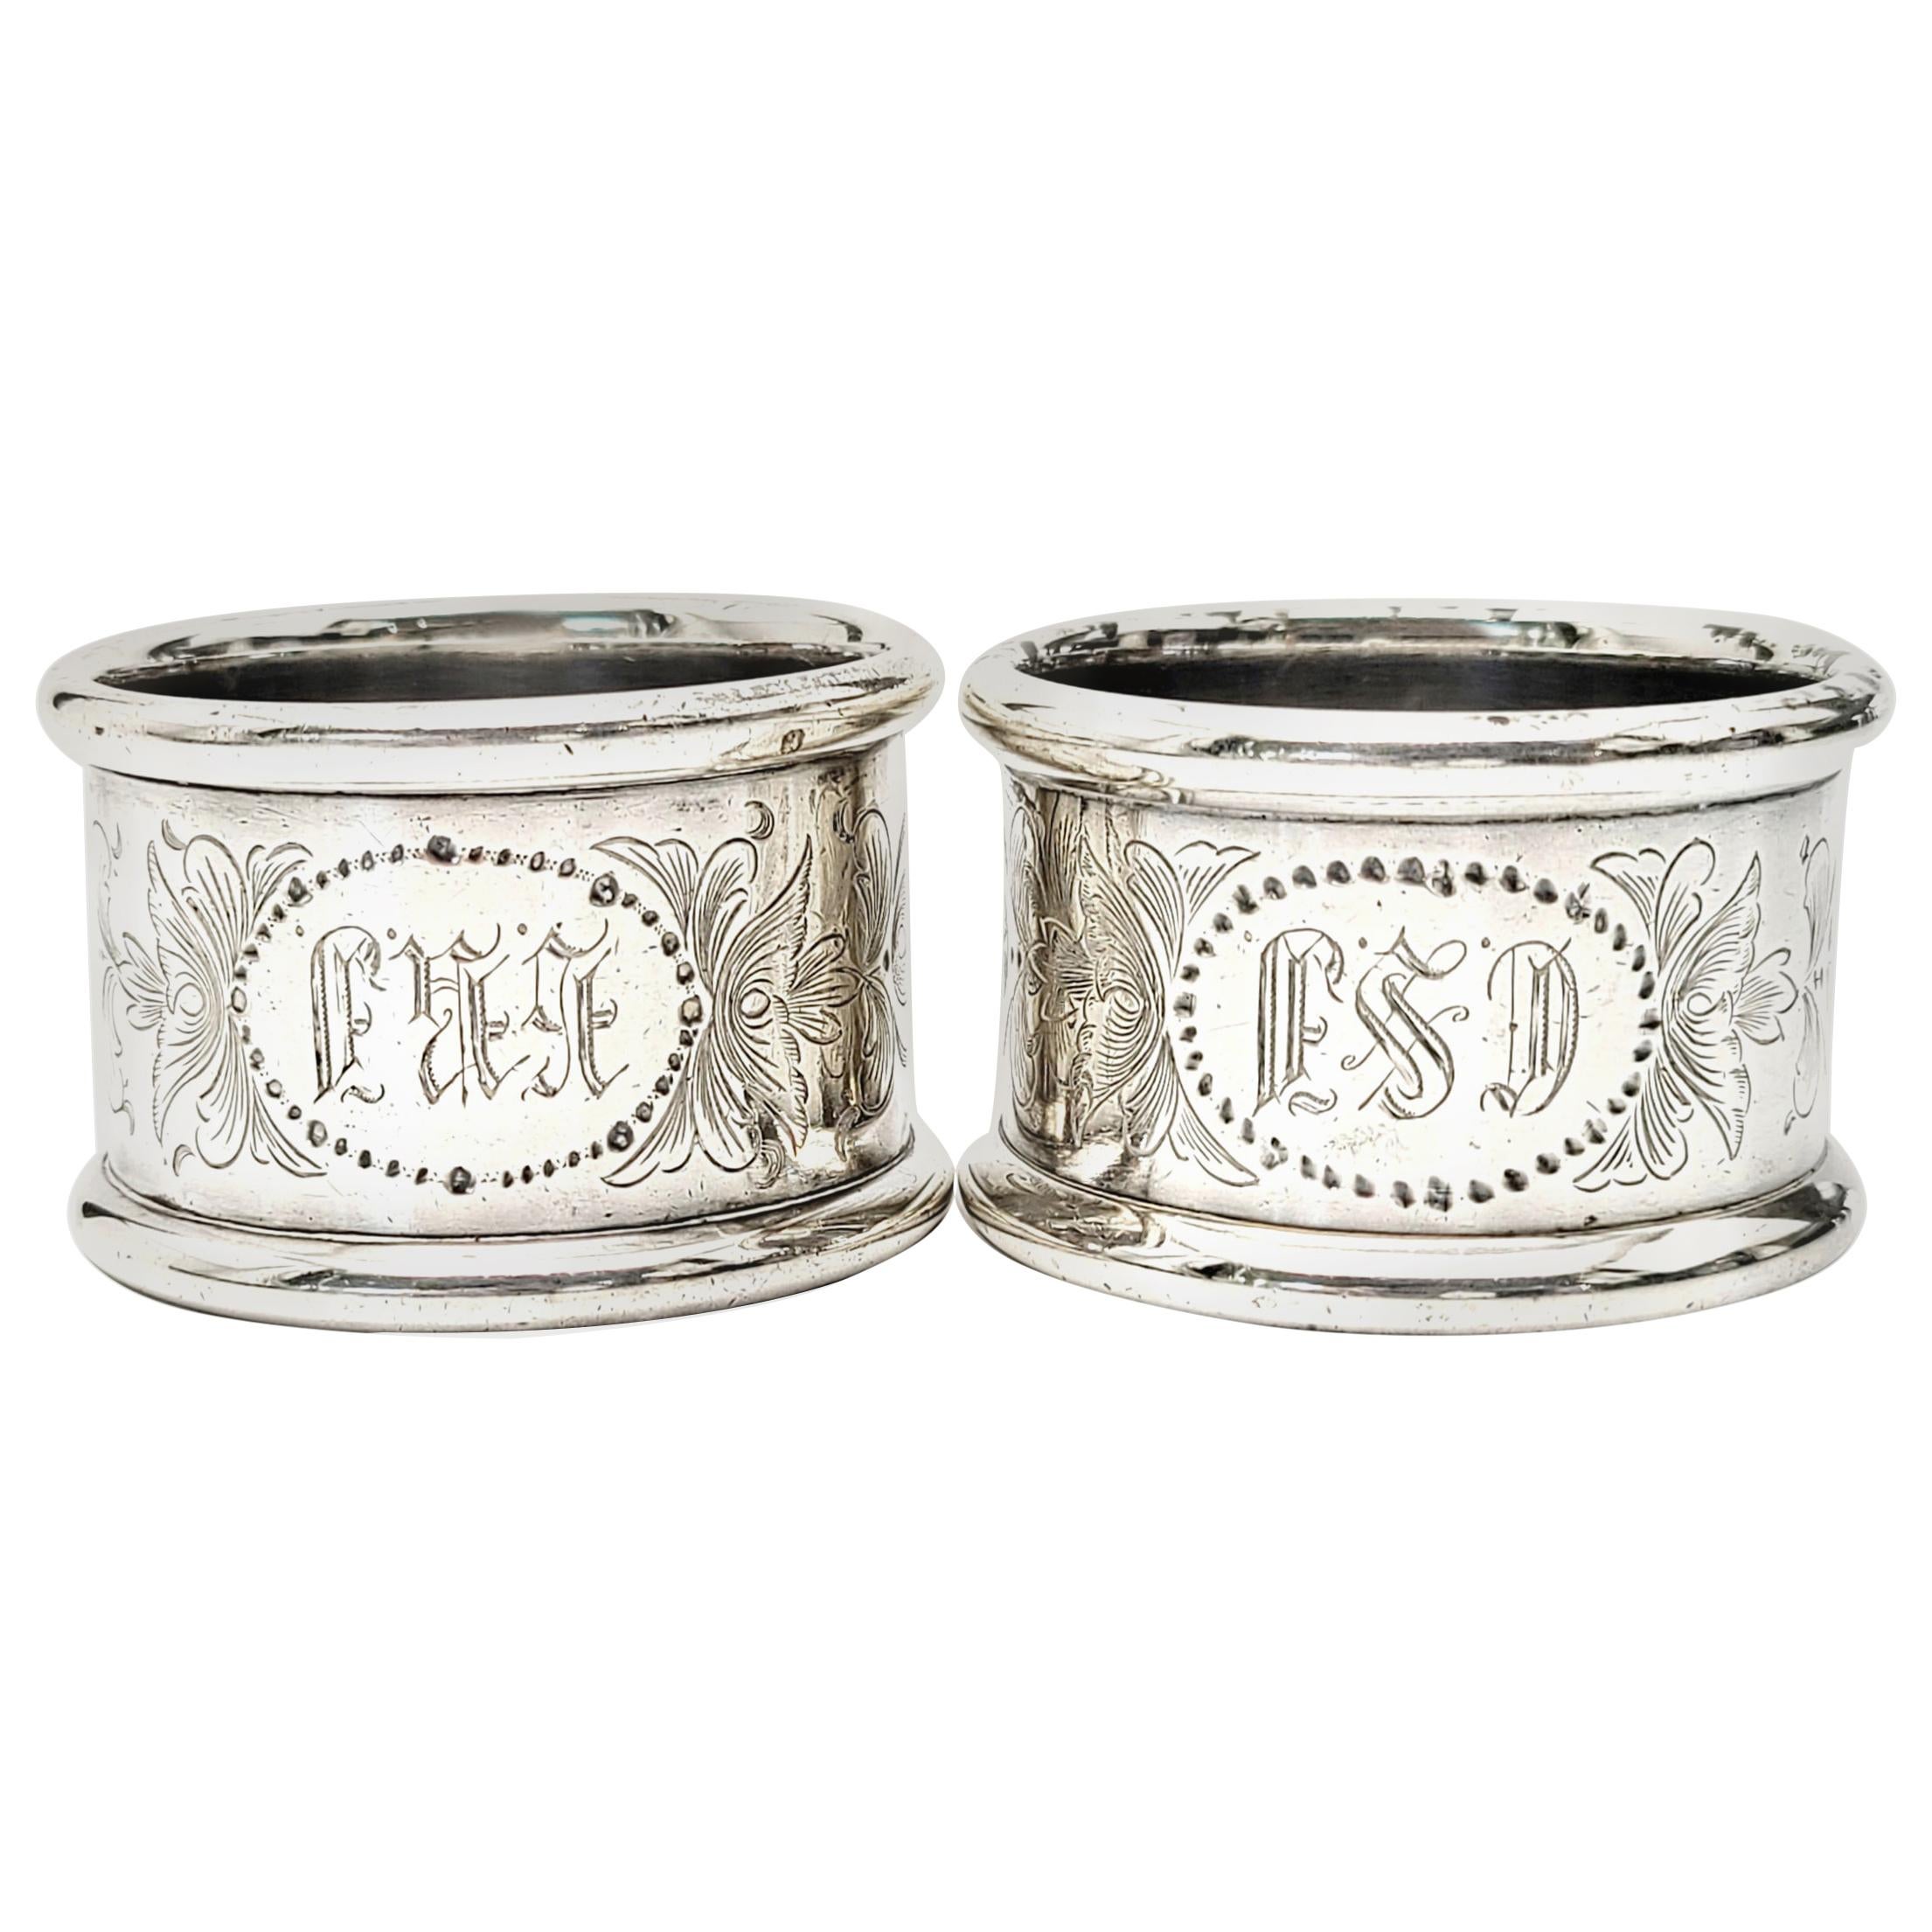 Set of 2 Towle Sterling Silver Napkin Rings 8770 For Sale